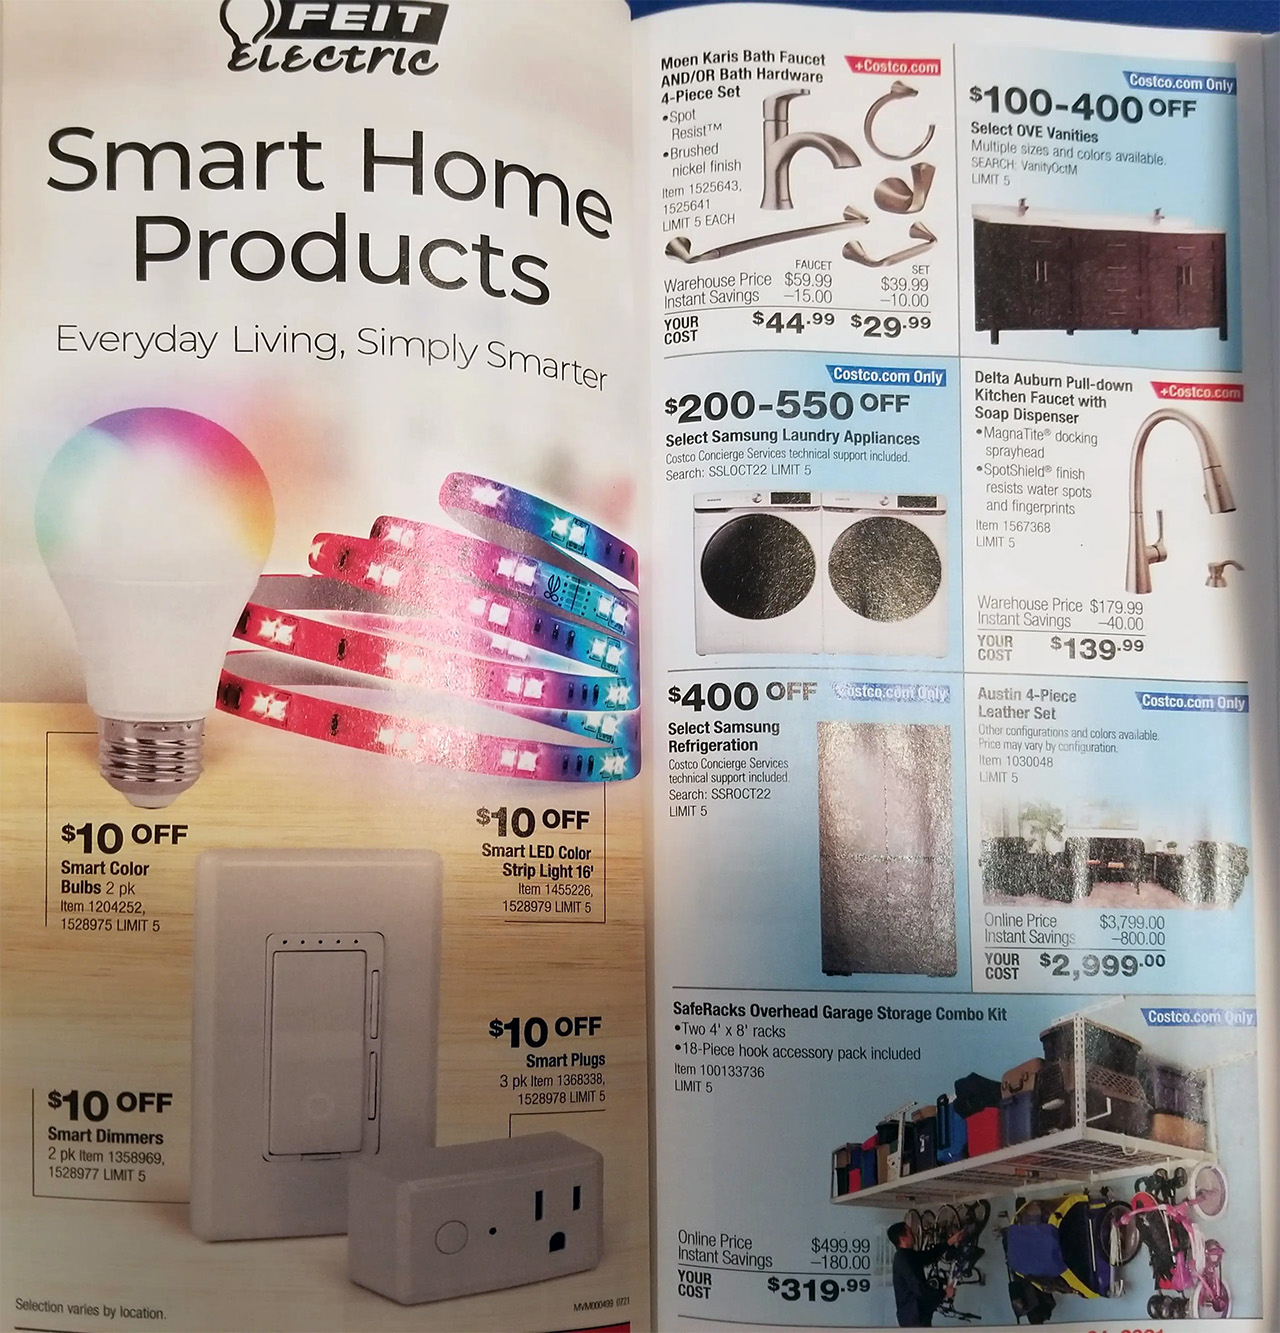 pages of the costco coupon book sept oct 2021